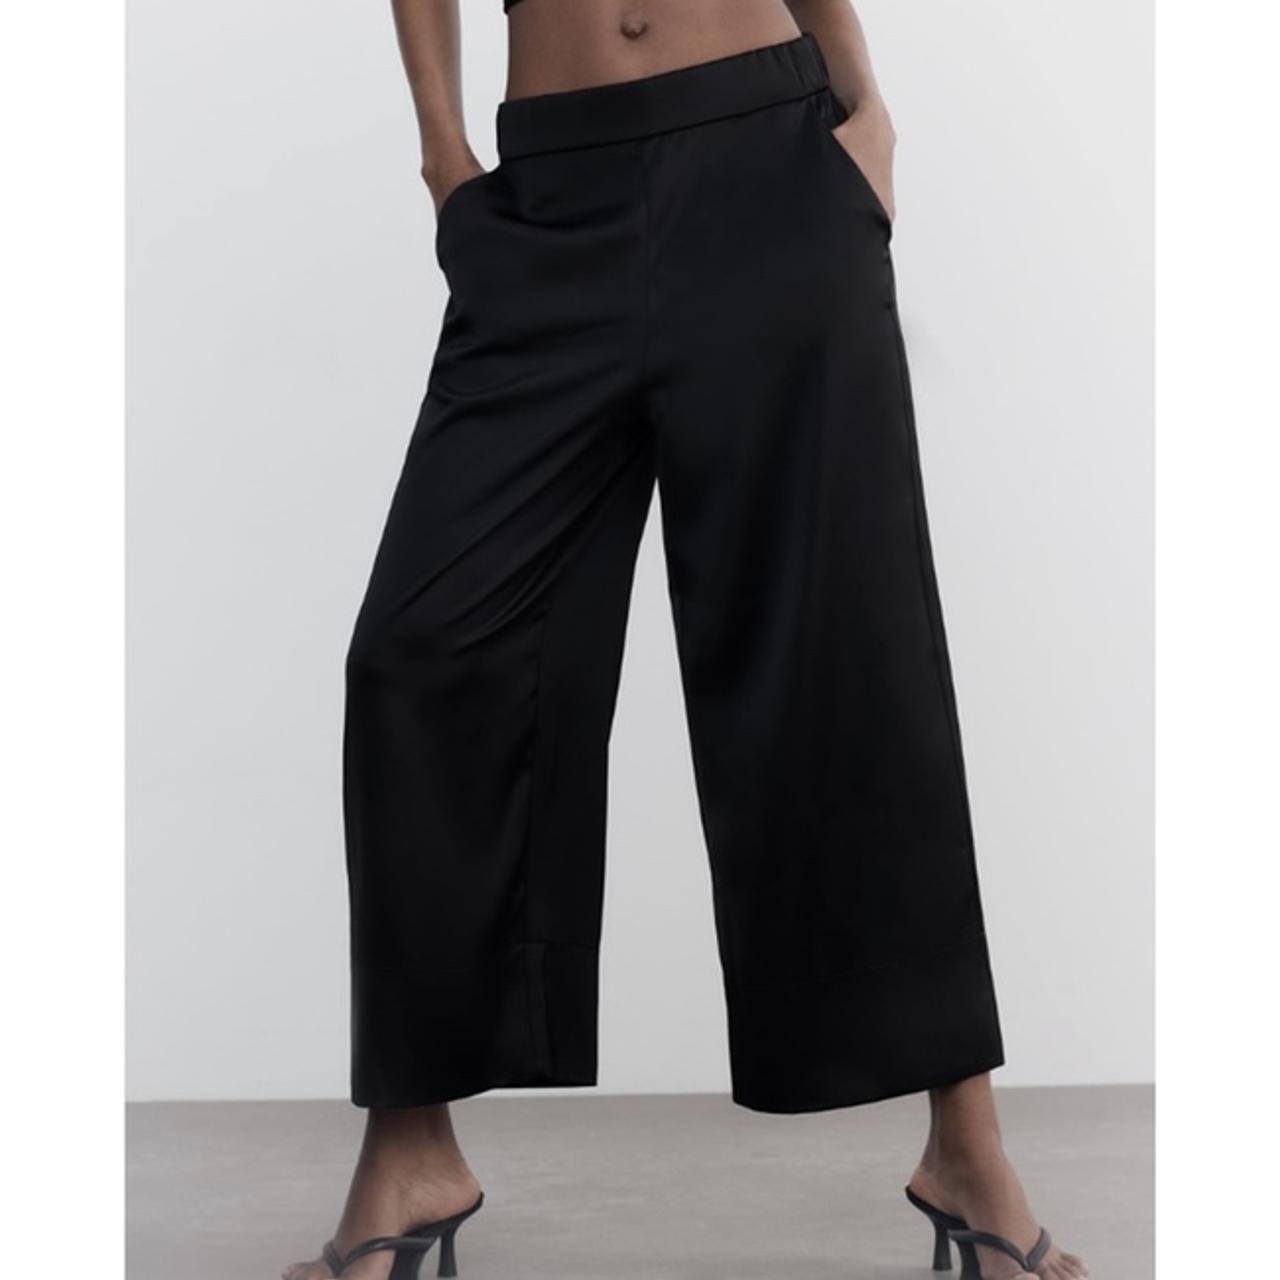 Satin wide leg pants with elastic waistband and side... - Depop